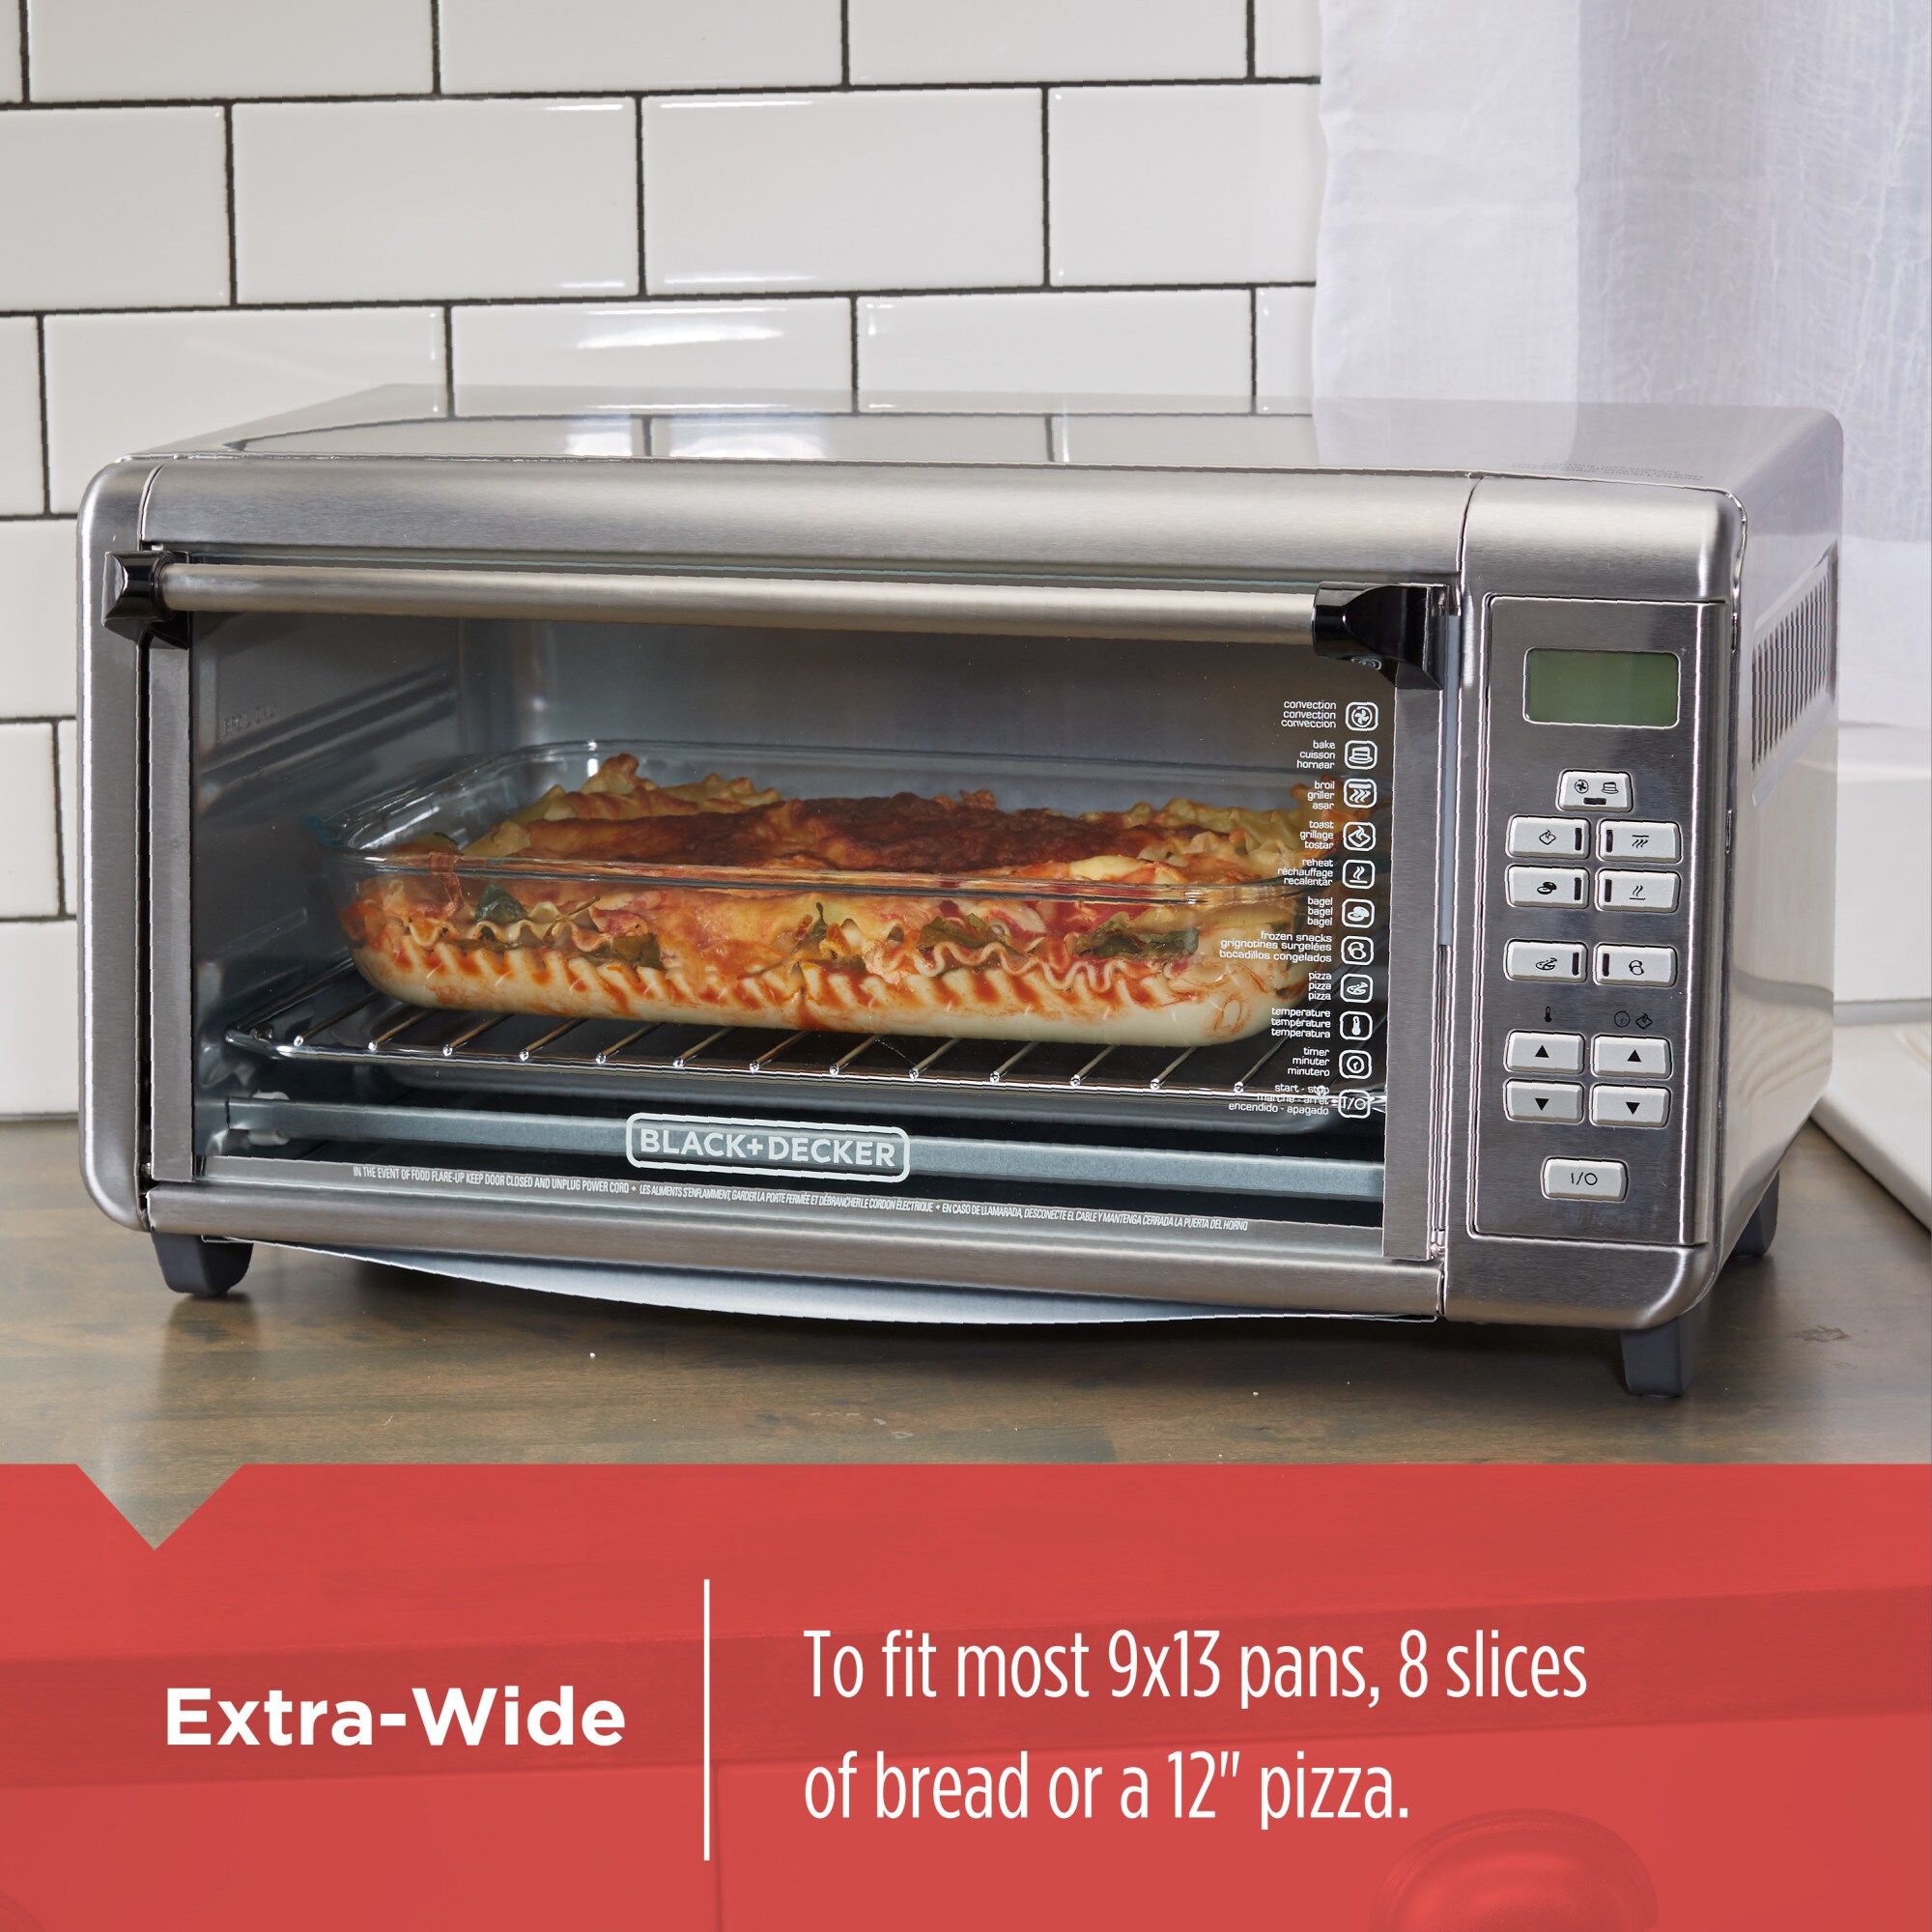 Applica Black-Decker Stainless Steel 8-Slice Extra Wide Toaster Oven Silver 